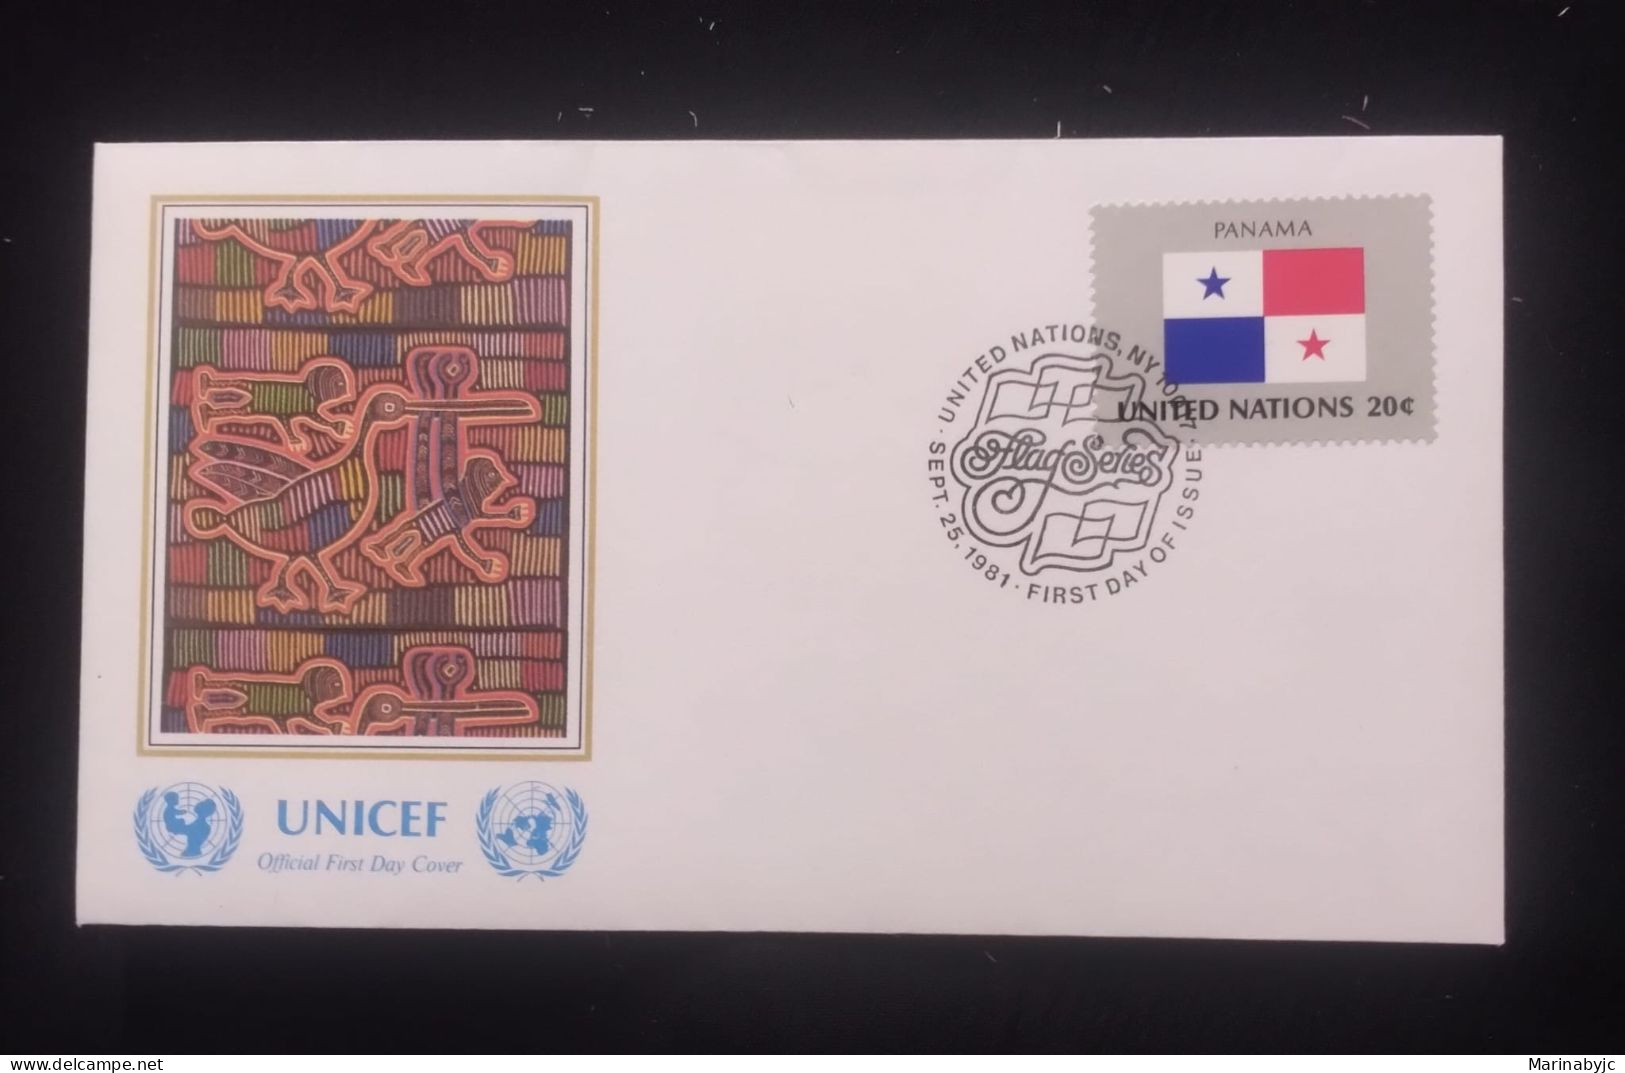 EL)1980 UNITED NATIONS, NATIONAL FLAG OF THE MEMBER COUNTRIES, PANAMA, ART - PAINTING, UNICEF, FDC - Nuevos